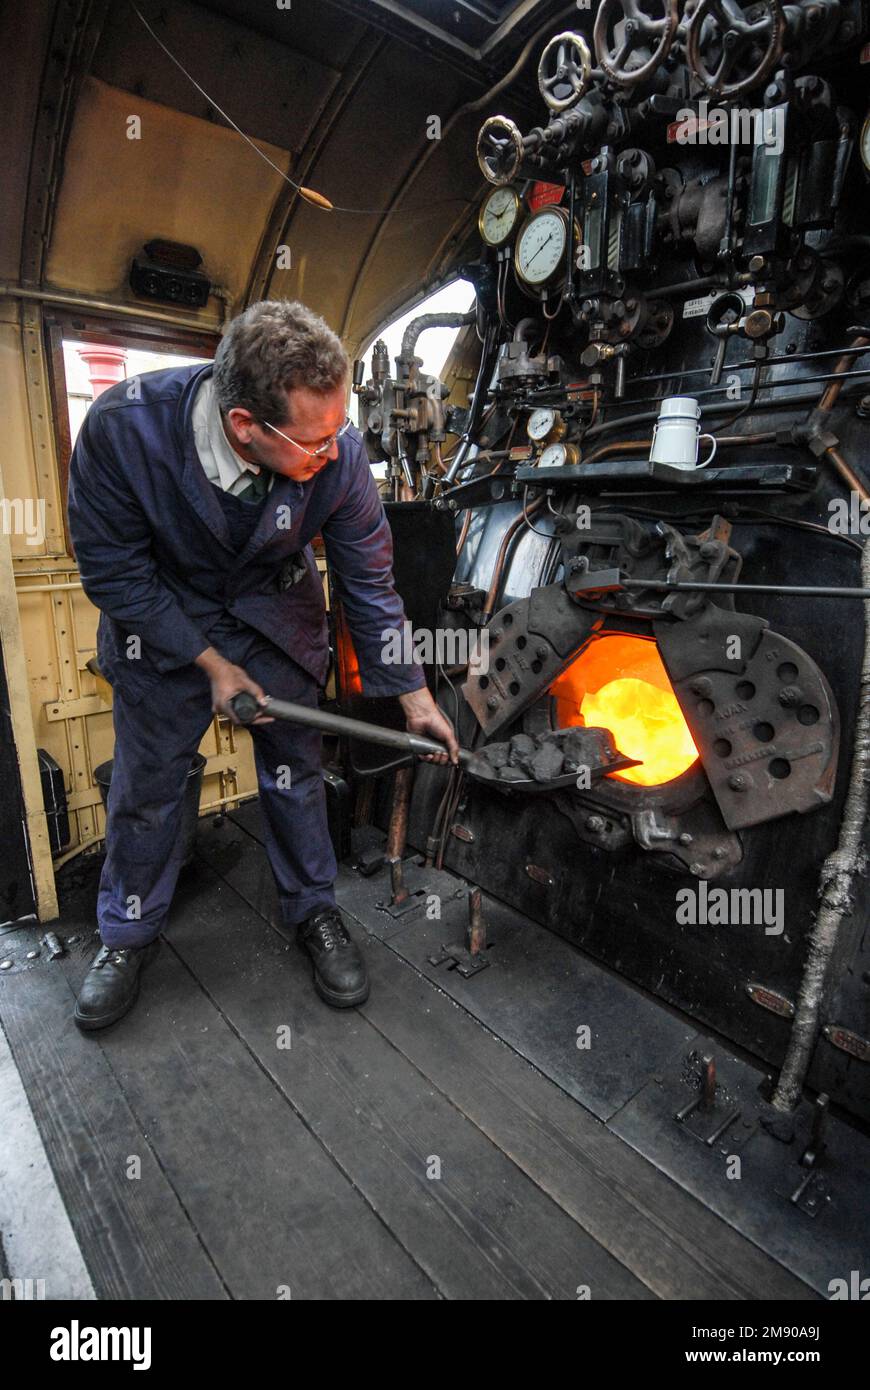 A steam engine fireman using a shovel, stoking coal into the steam train furnace at Winchcombe station in the Cotswolds in Britain.  It is part of the Stock Photo